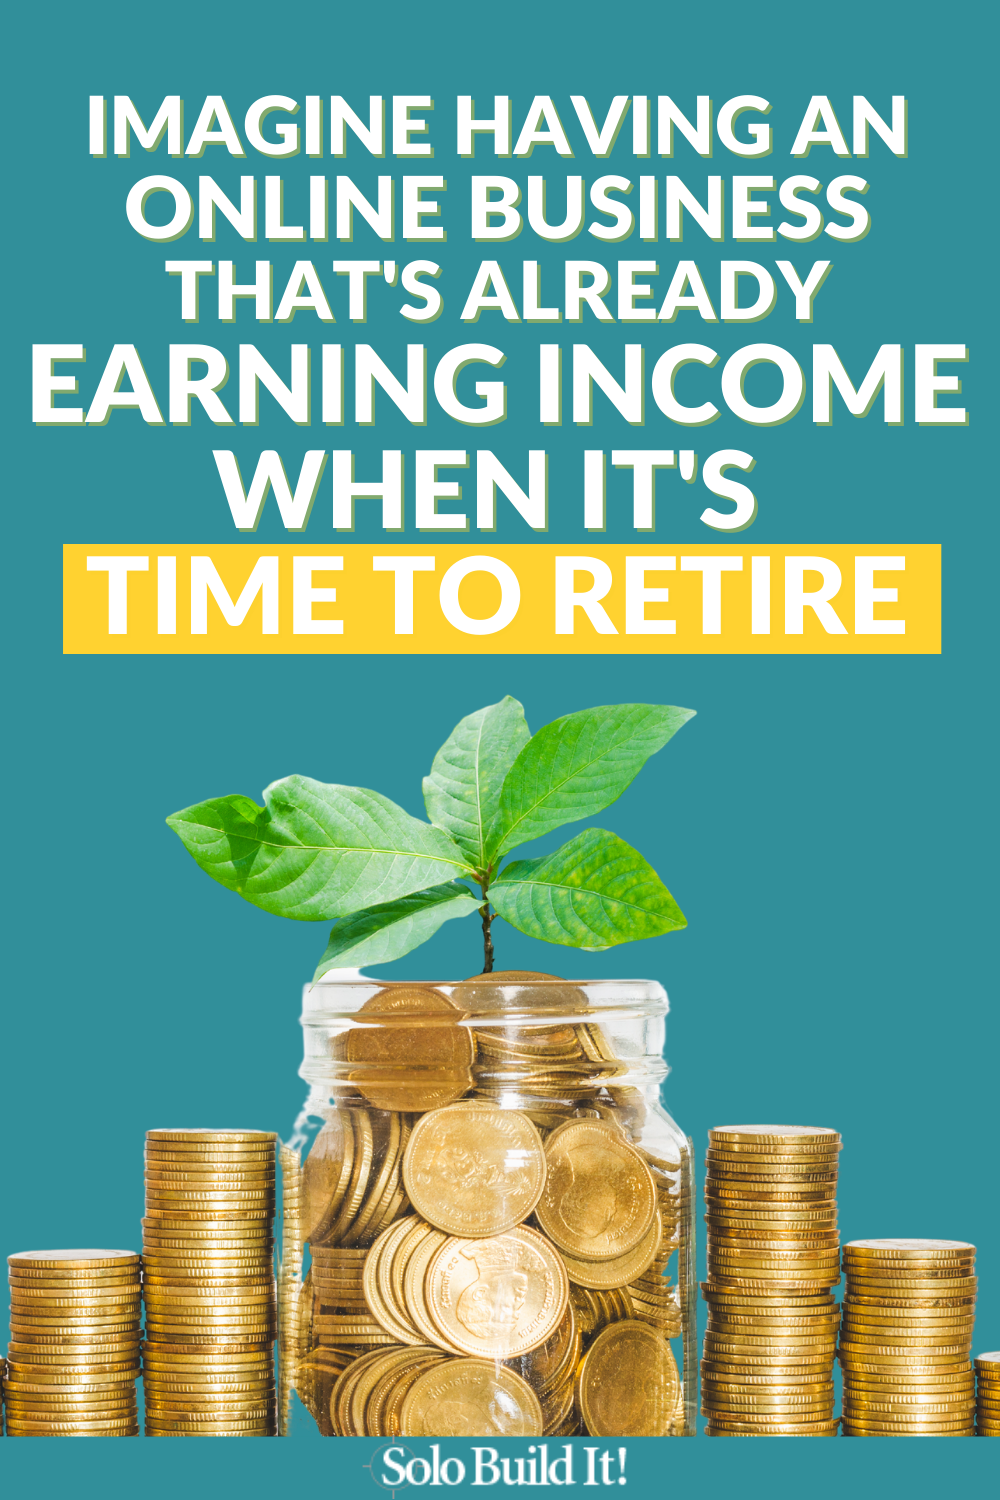 Should You Start an Online Business After Retirement?